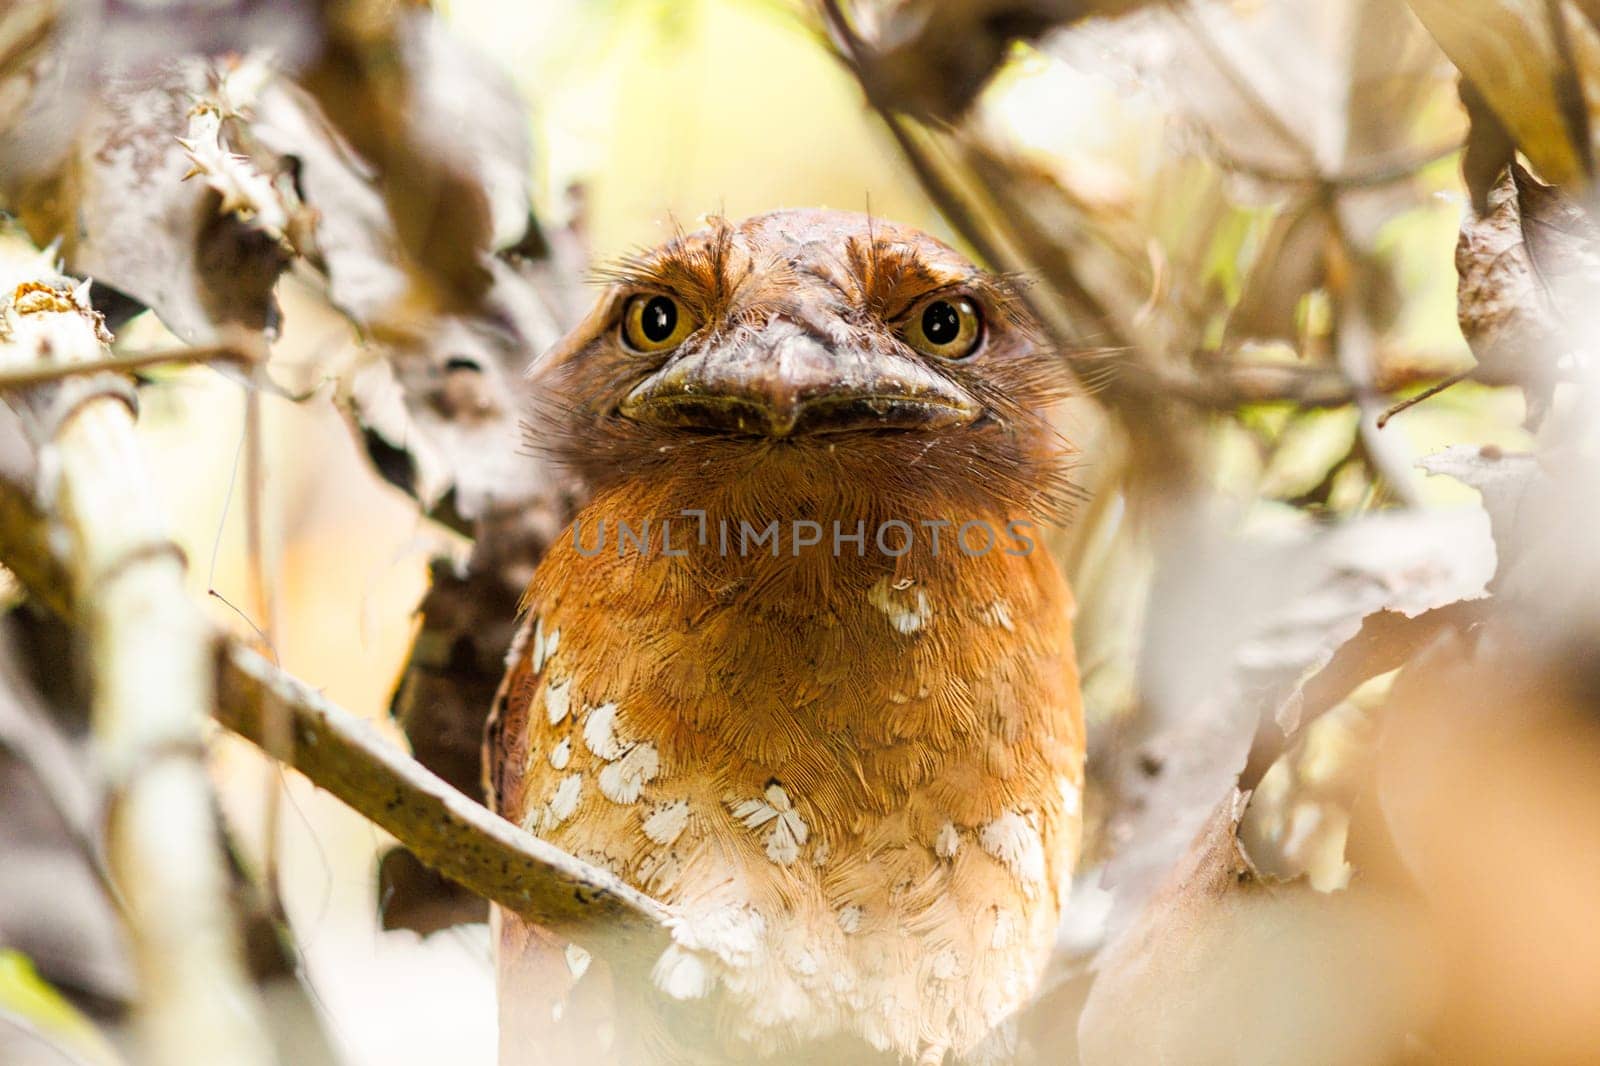 A femal Srilankan Frogmouth hiding in the vines in southern India